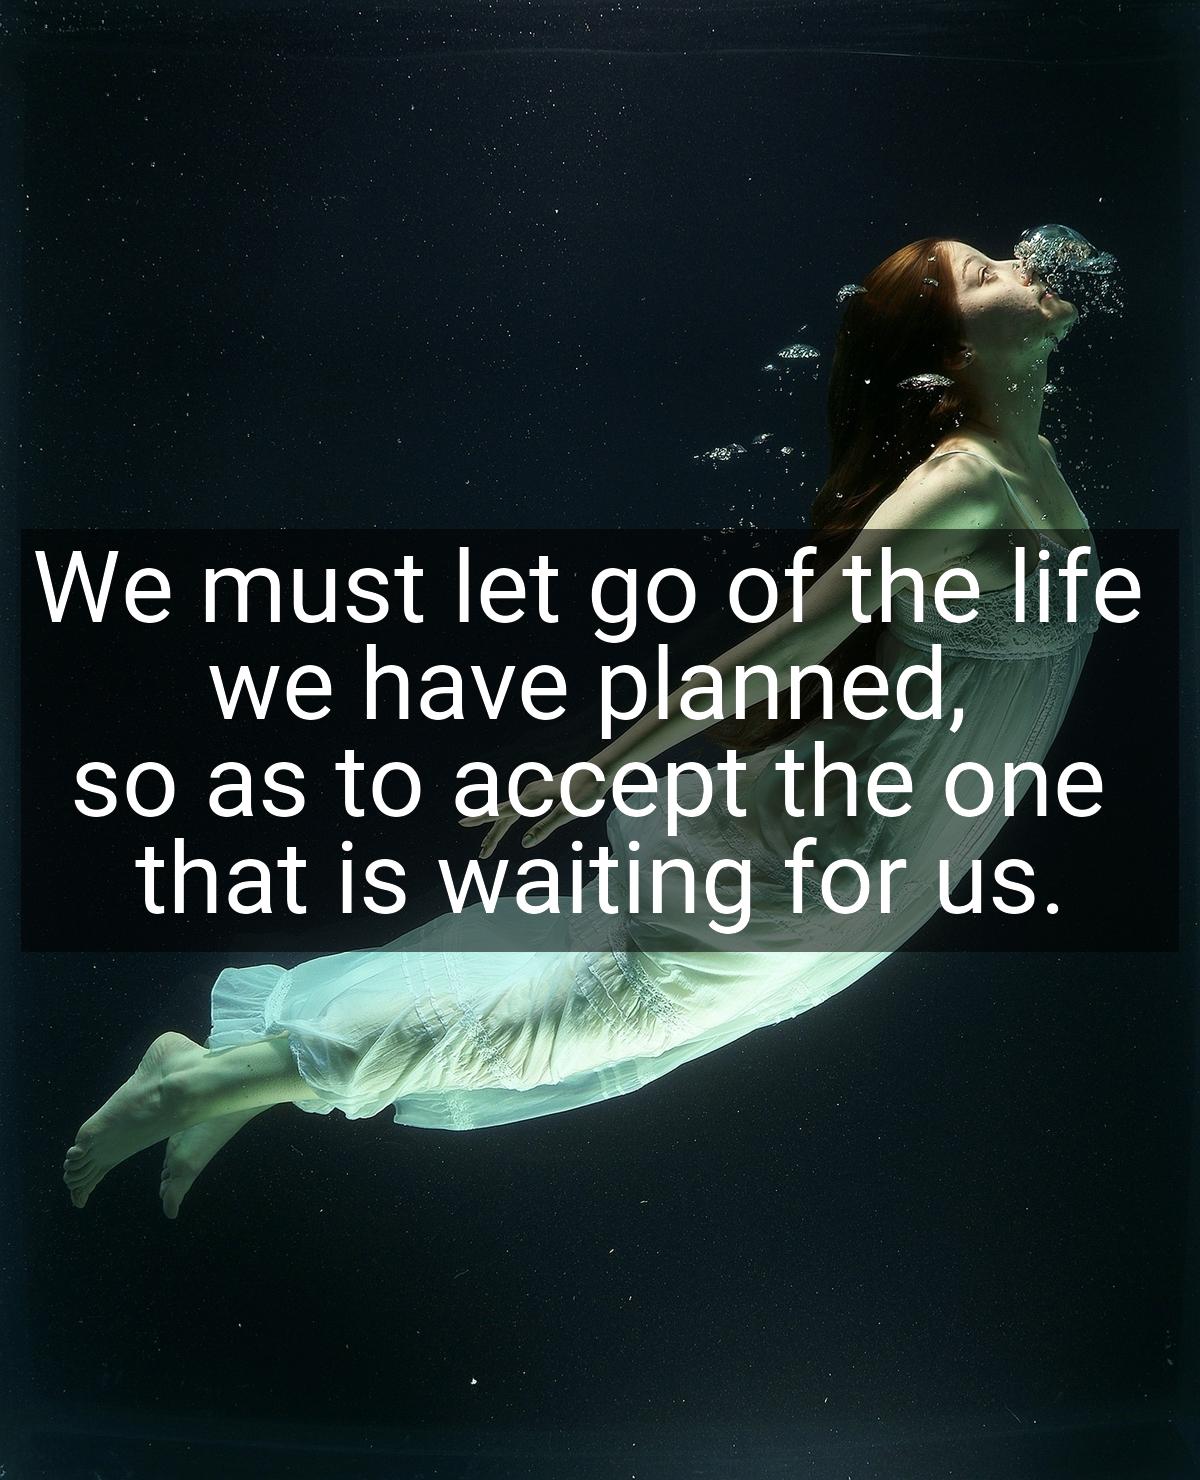 We must let go of the life we have planned, so as to accept